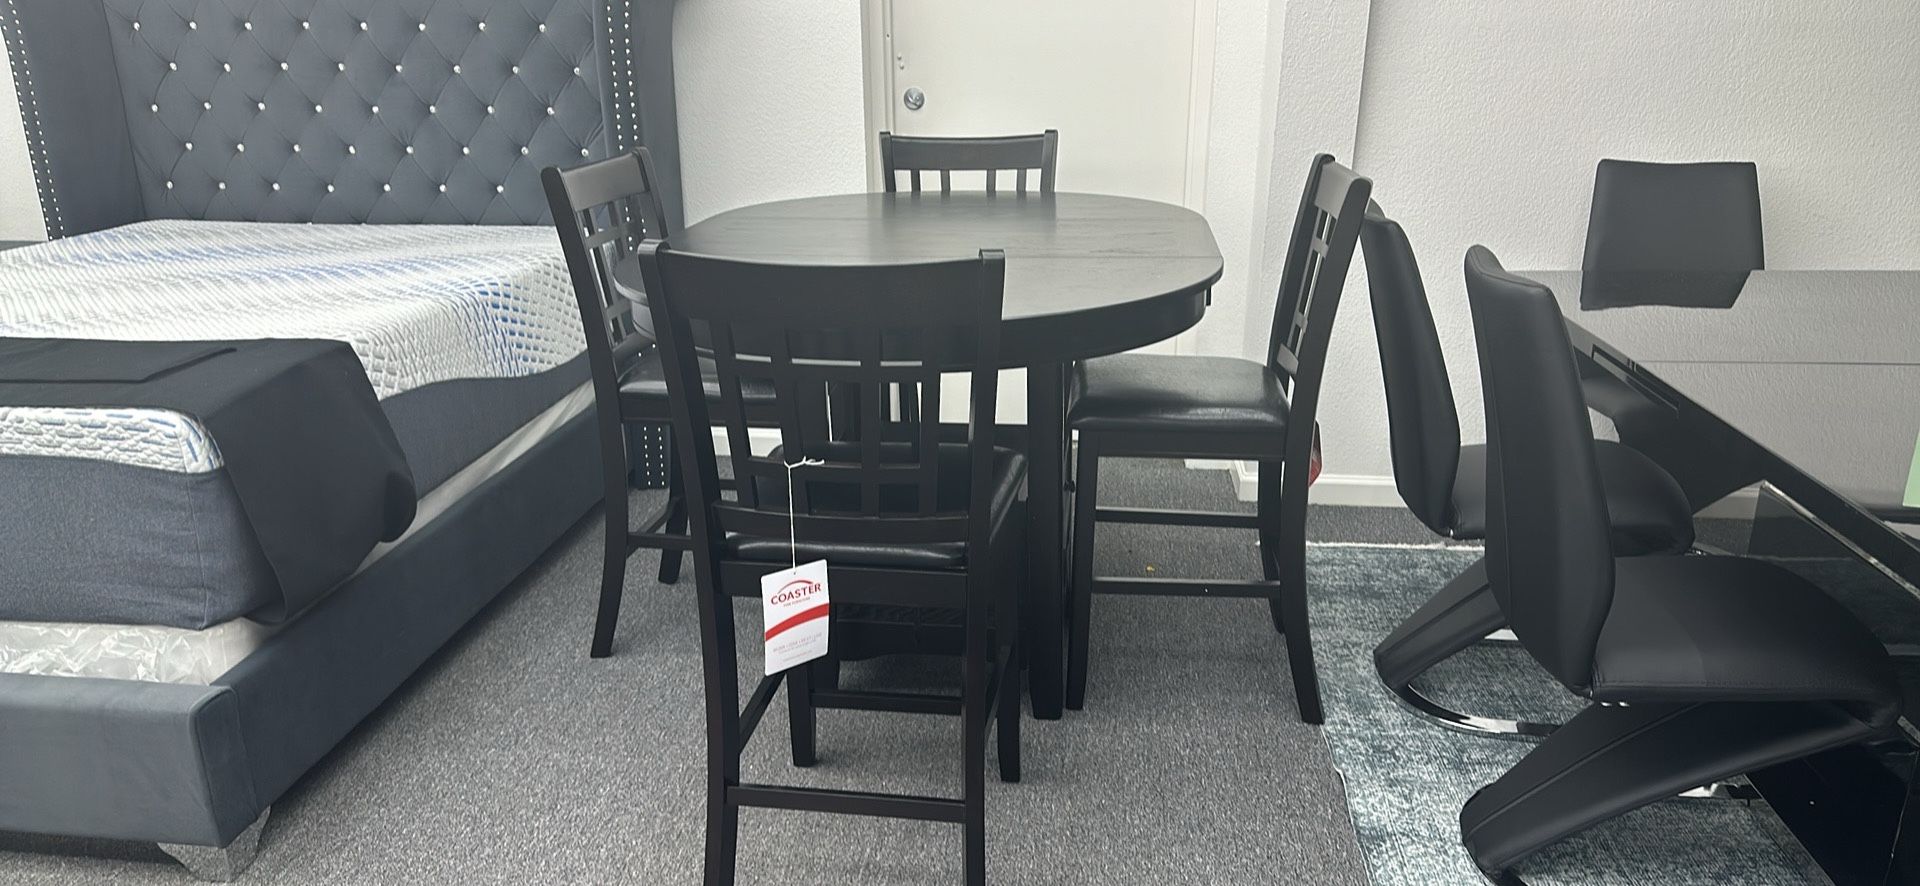 5pc Dining Table Set